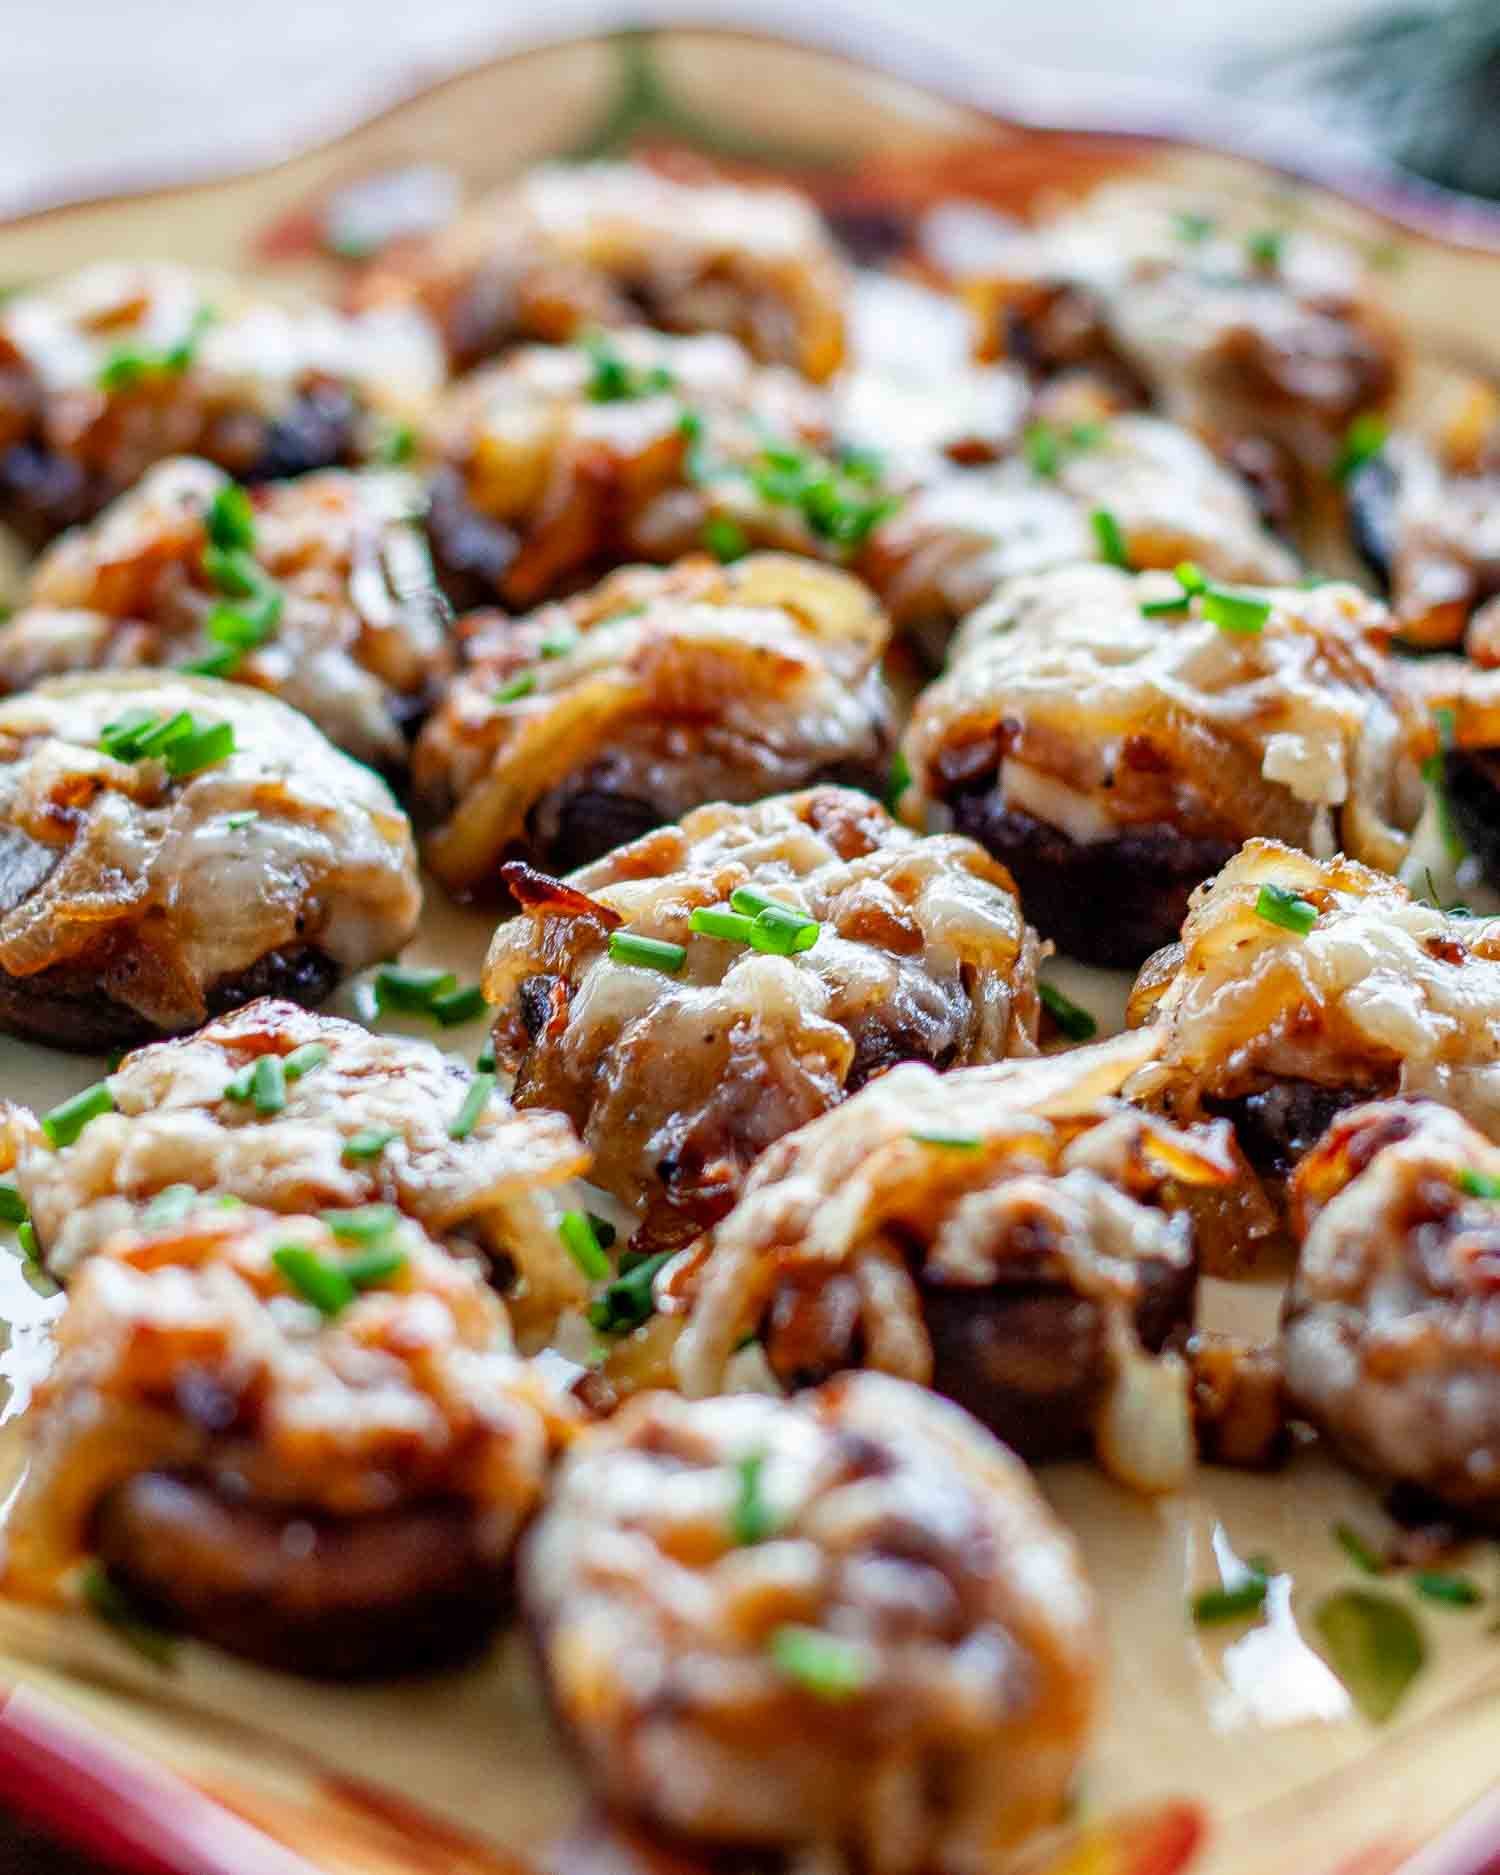 french onion stuffed mushrooms on a plate garnished with chives.